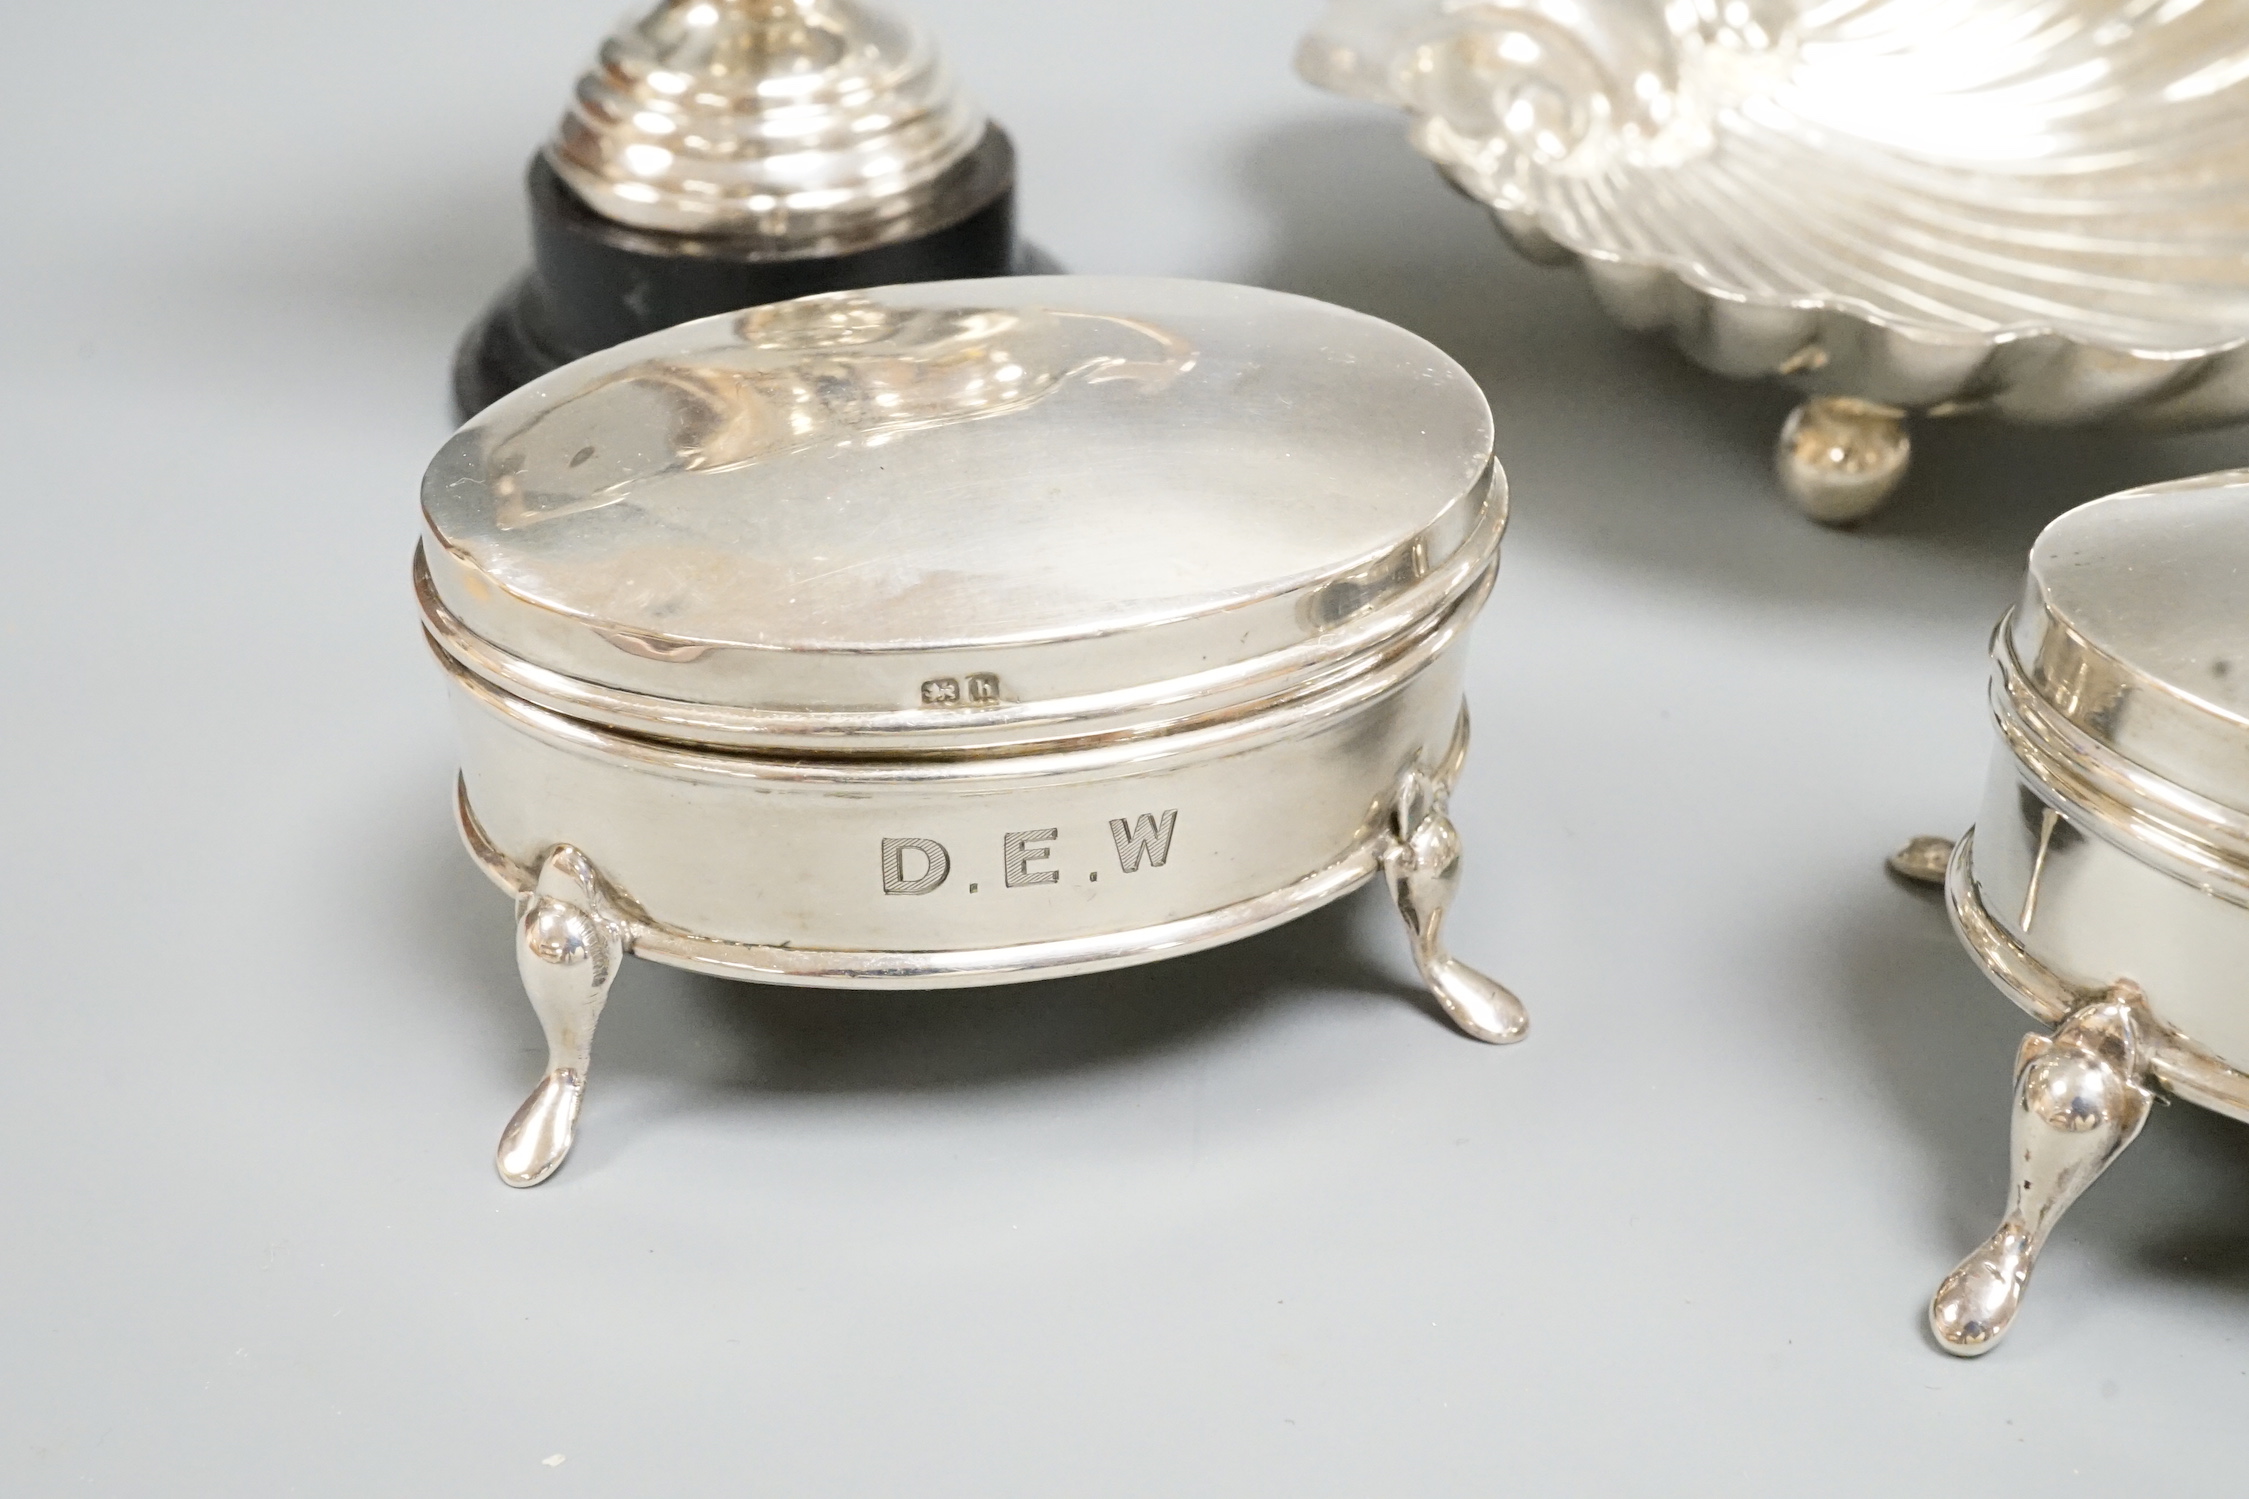 Sundry silver including cream and sugar, trinket boxes, butter shell, toilet jars, etc.